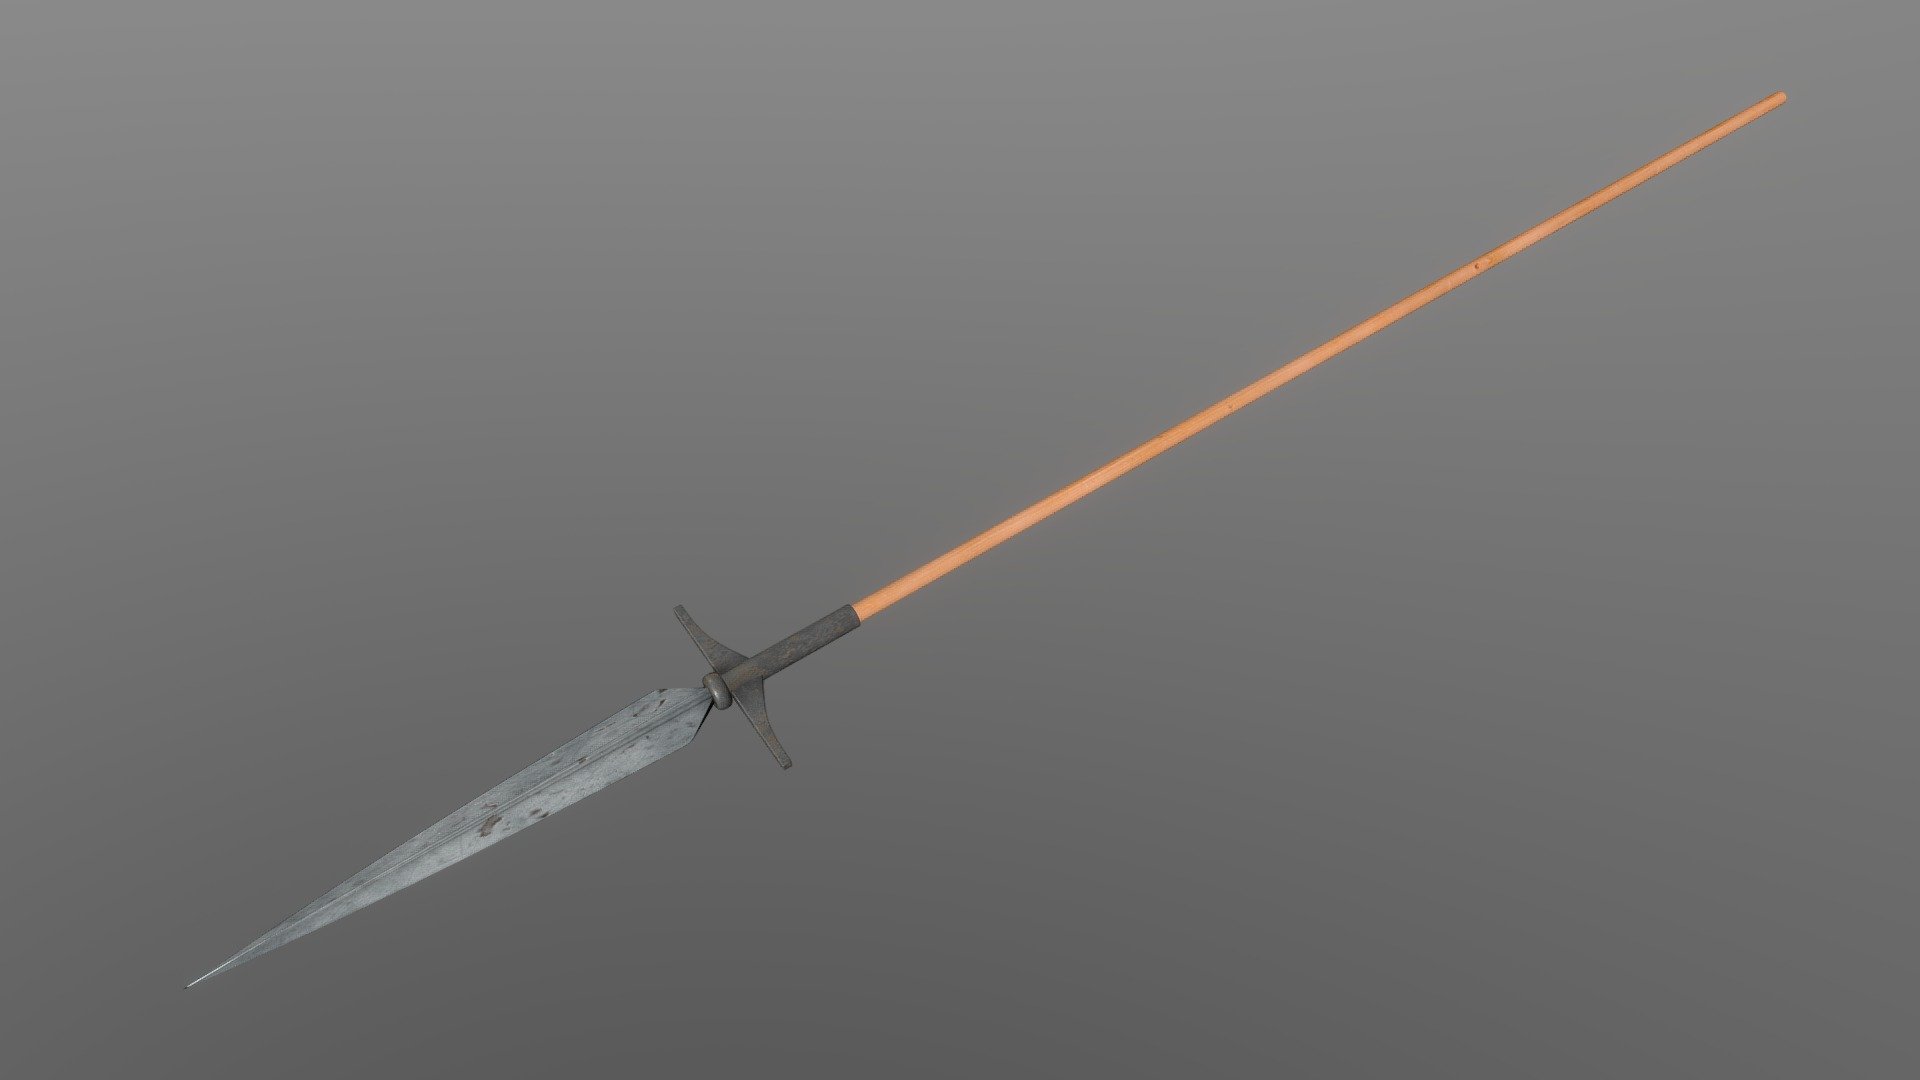 Boar Spear C
Bring your project to life with this low poly 3D model of an Boar Spear. Perfect for use in games, animations, VR, AR, and more, this model is optimized for performance and still retains a high level of detail.


Features



Low poly design with 2,532 vertices

4,994 edges

2,468 faces (polygons)

4,936 tris

2k PBR Textures and materials

File formats included: .obj, .fbx, .dae, .stl


Tools Used
This Boar Spear low poly 3D model was created using Blender 3.3.1, a popular and versatile 3D creation software.


Availability
This low poly Boar Spear 3D model is ready for use and available for purchase. Bring your project to the next level with this high-quality and optimized model 3d model